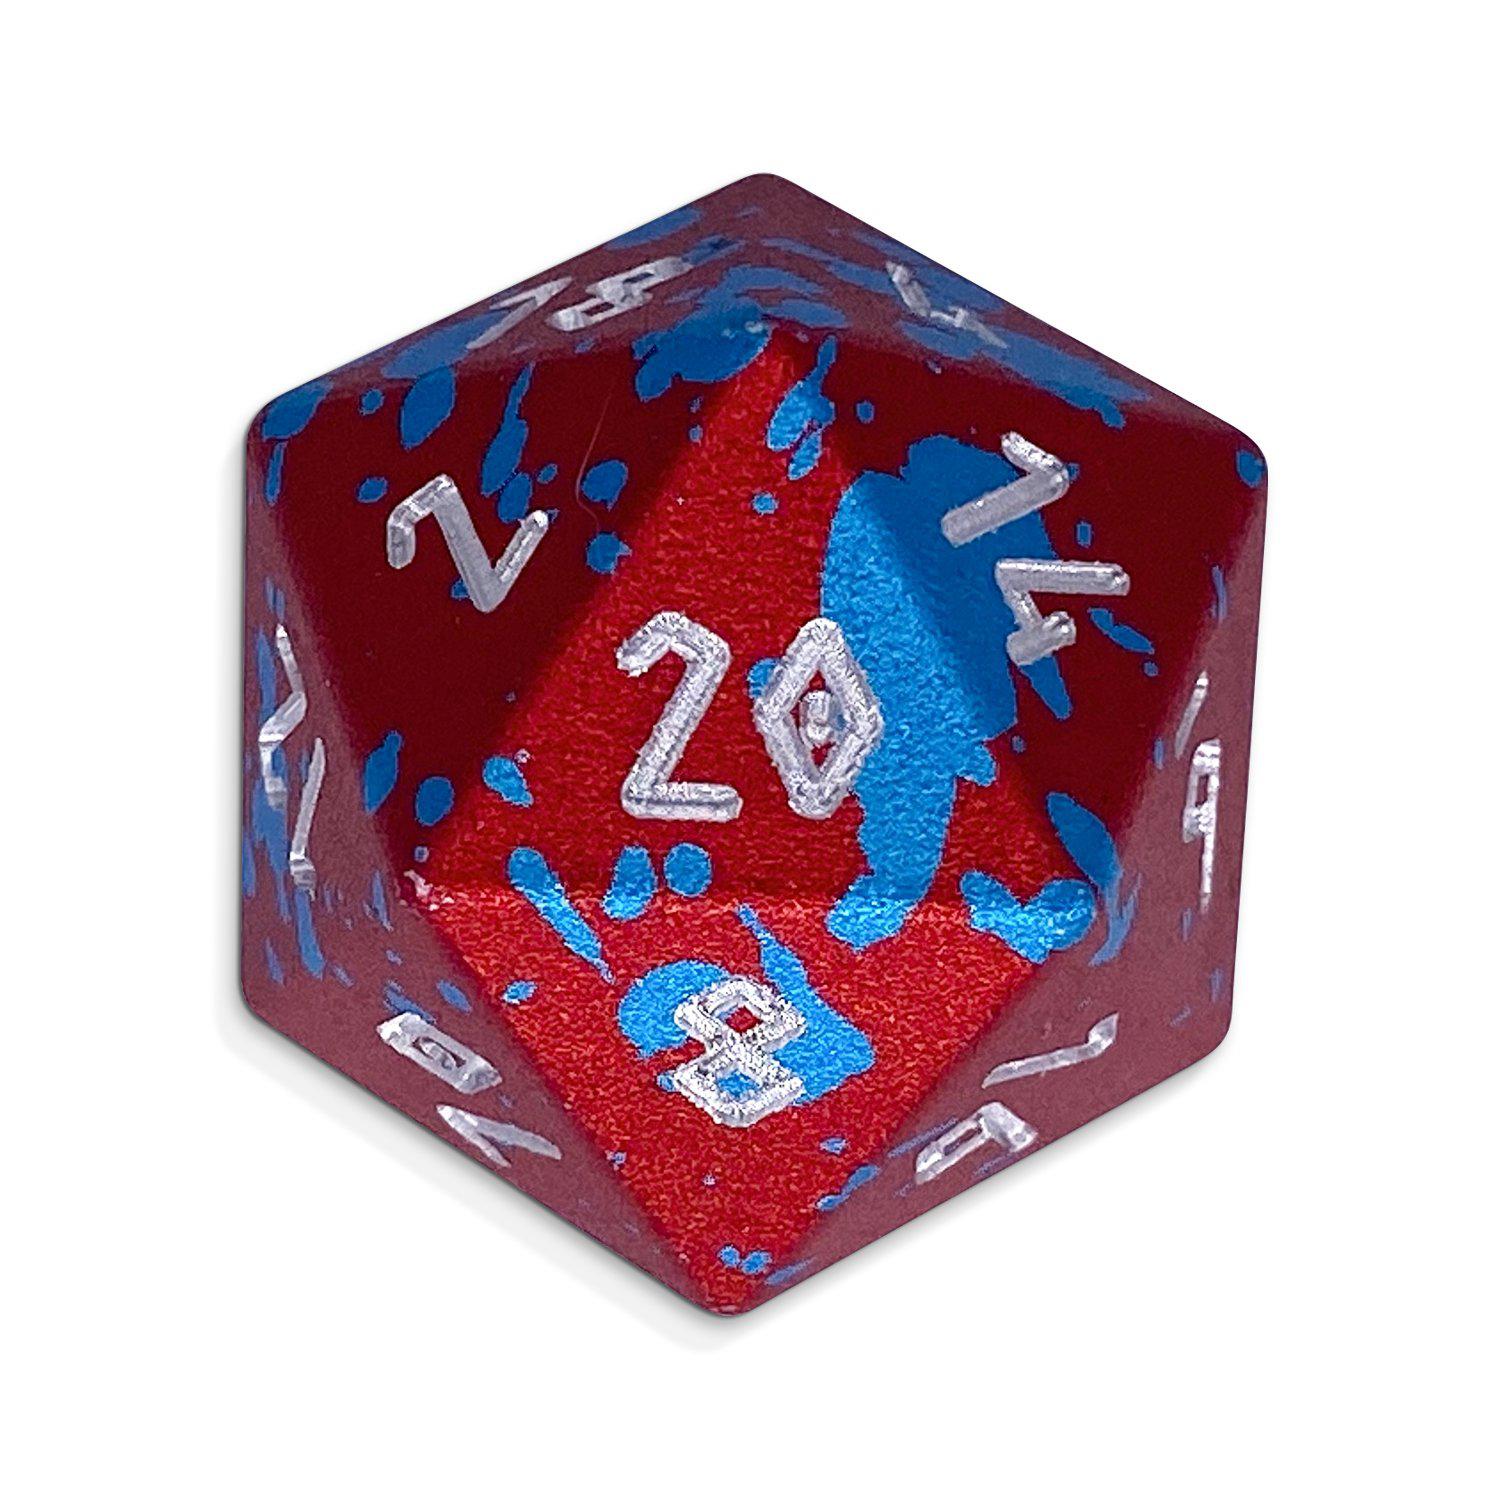 Single Wondrous Dice® D20 in Old Glory by Norse Foundry® 6063 Aircraft Grade Aluminum - NOR 02417